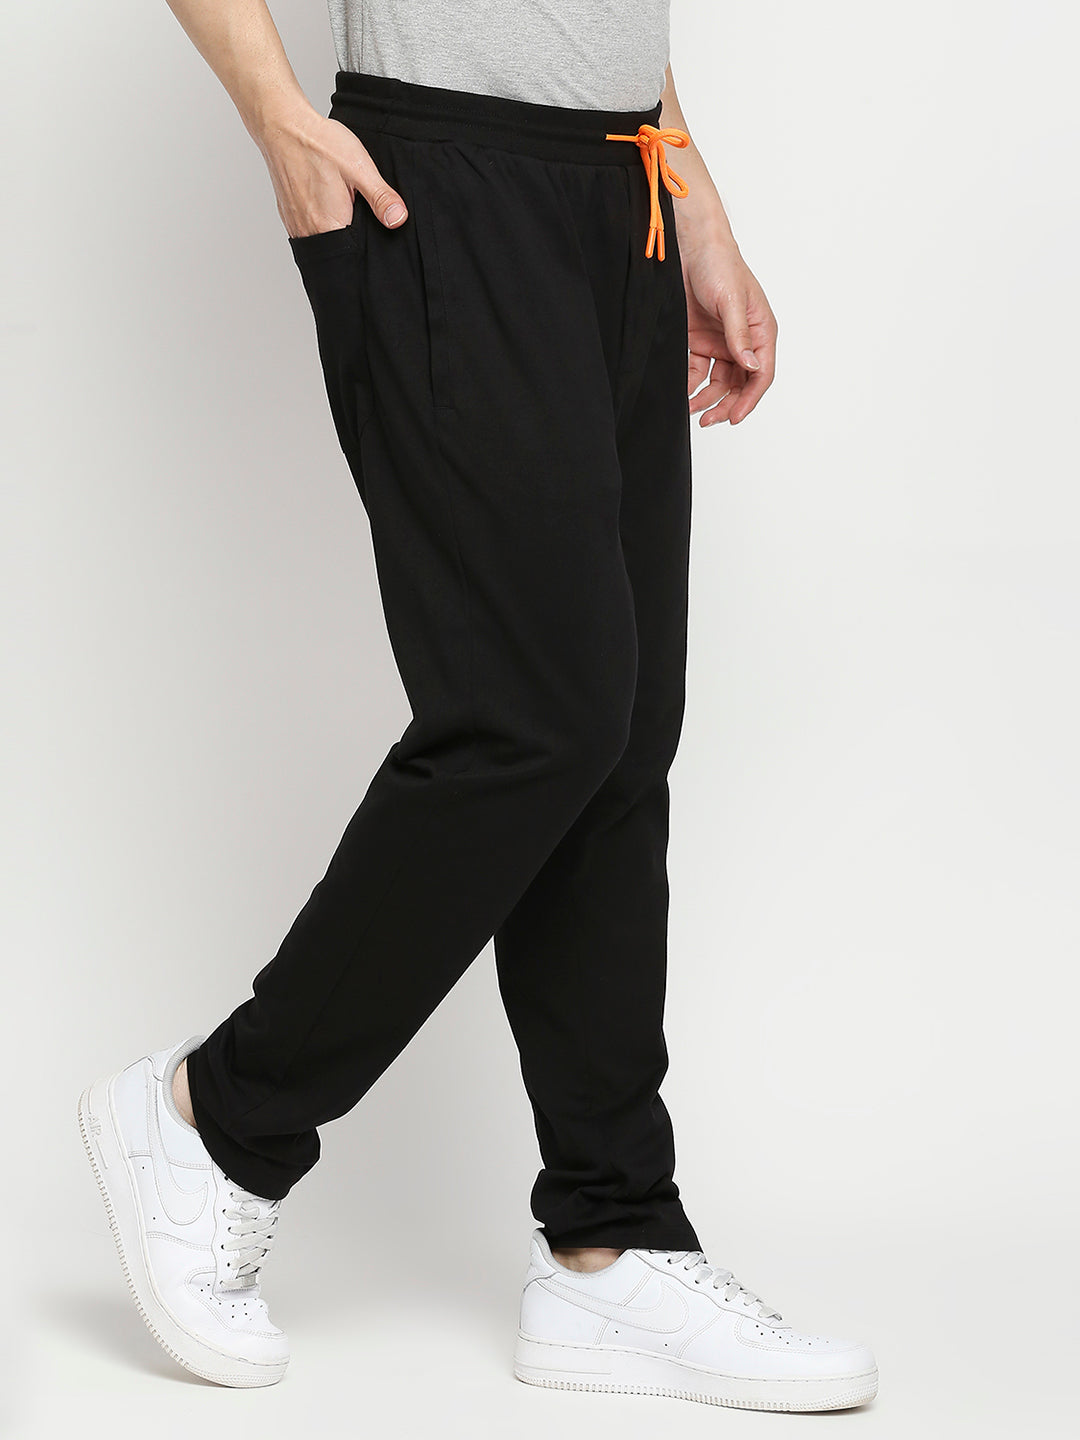 Men Cotton Blend Knitted Black Trackpant- Underjeans by Spykar